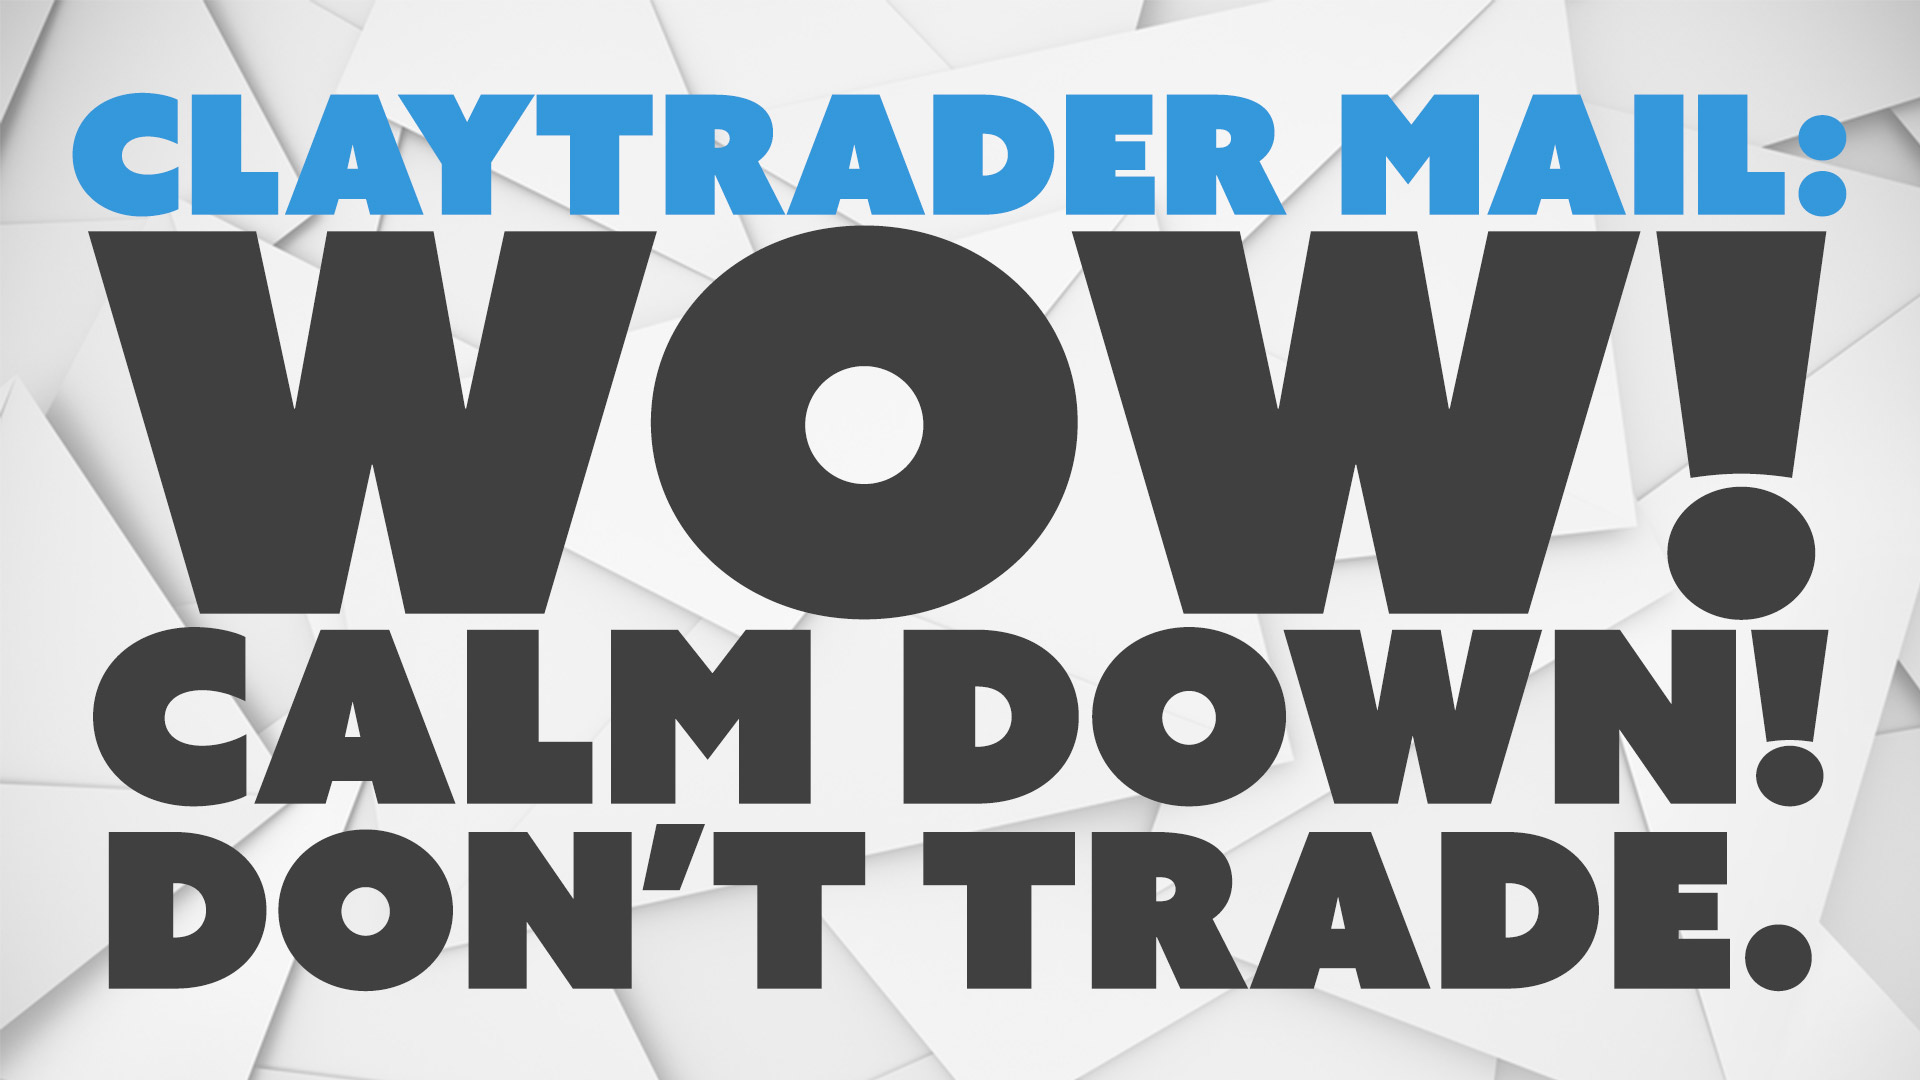 ClayTrader Mail: Wow! Calm Down! Don’t Trade.